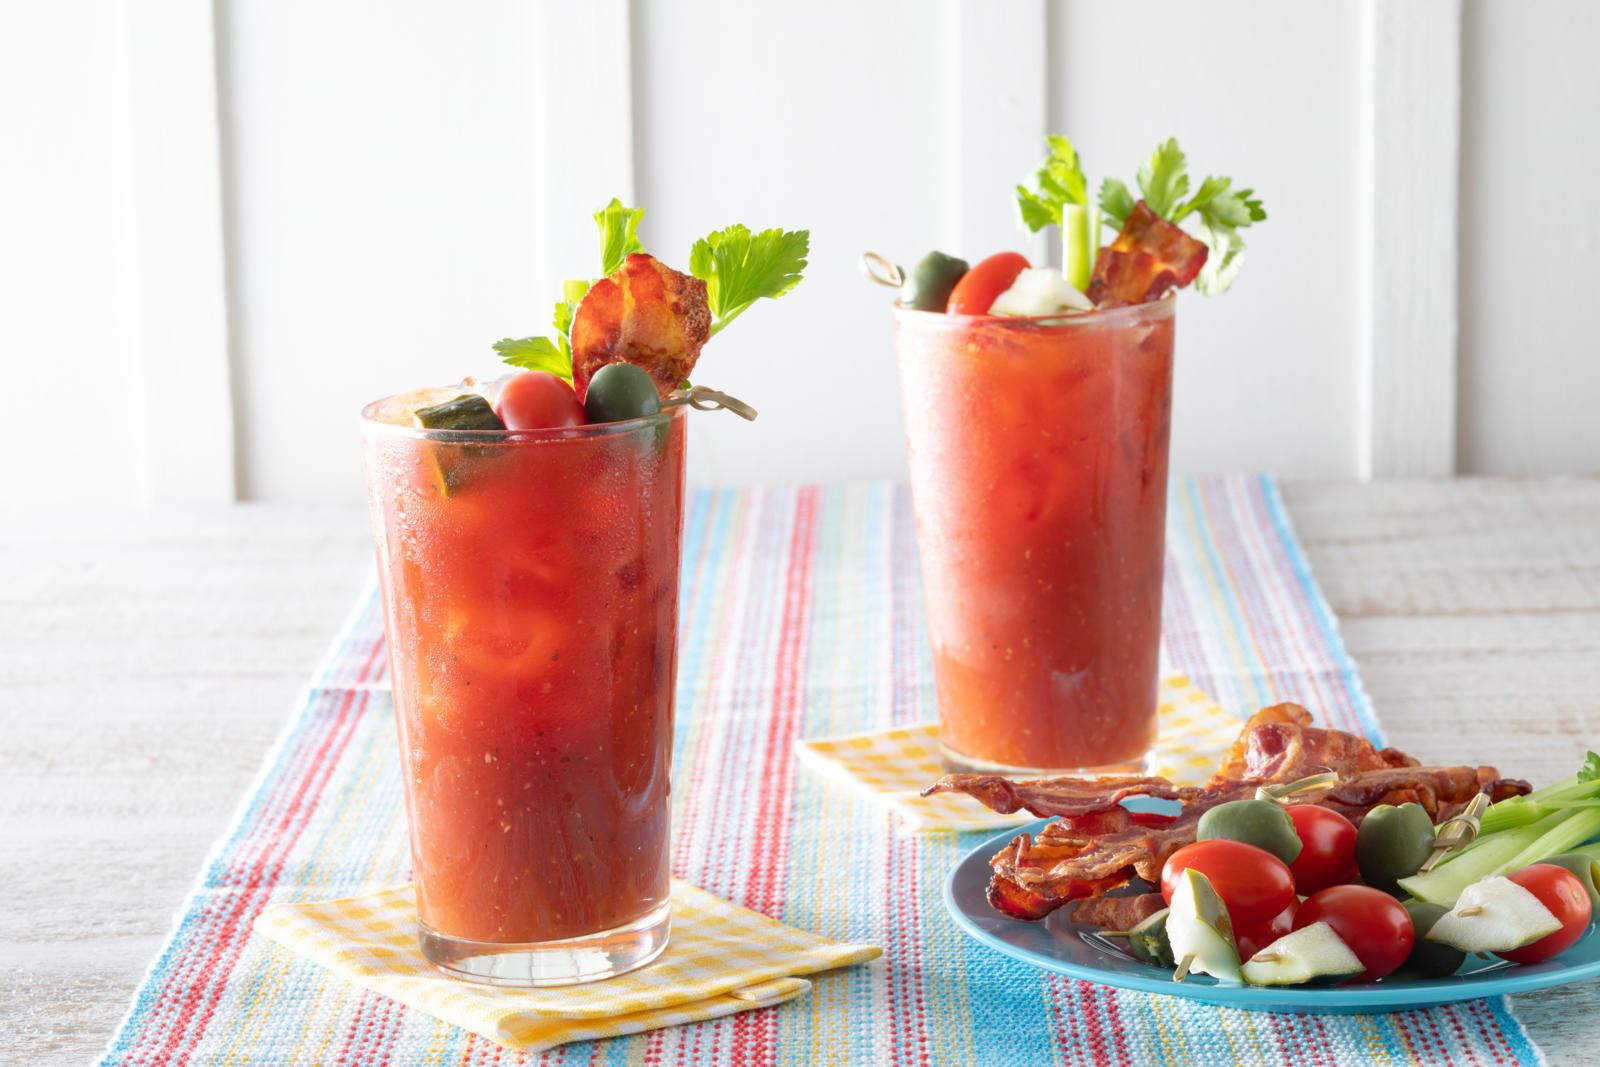 https://hips.hearstapps.com/hmg-prod/images/classic-bloody-mary-recipe-1620857654.jpg